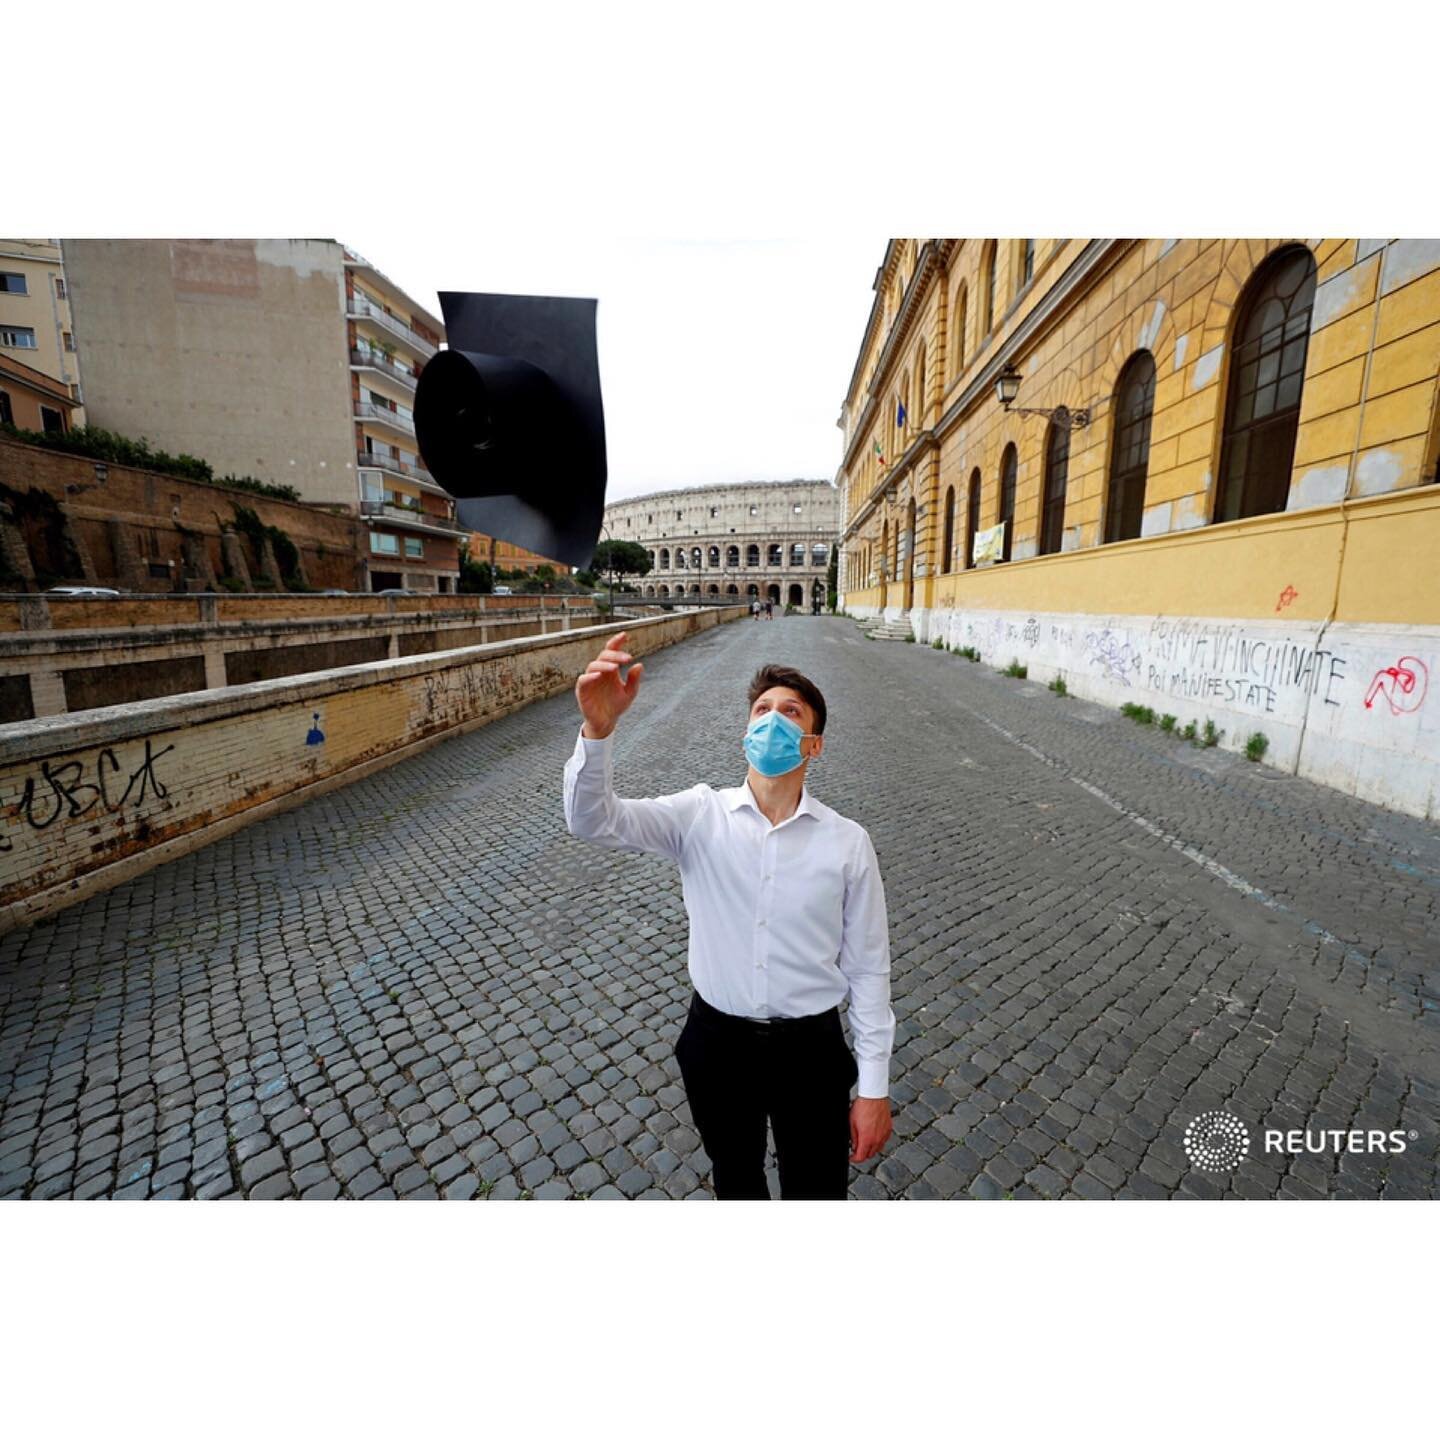 A student wearing a protective face mask celebrates after taking his final exams under strict regulations in post-lockdown Italy, following the coronavirus disease (COVID-19) outbreak, in front of the Colosseum in Rome, Italy June 17, 2020.
.
.
.
.
.